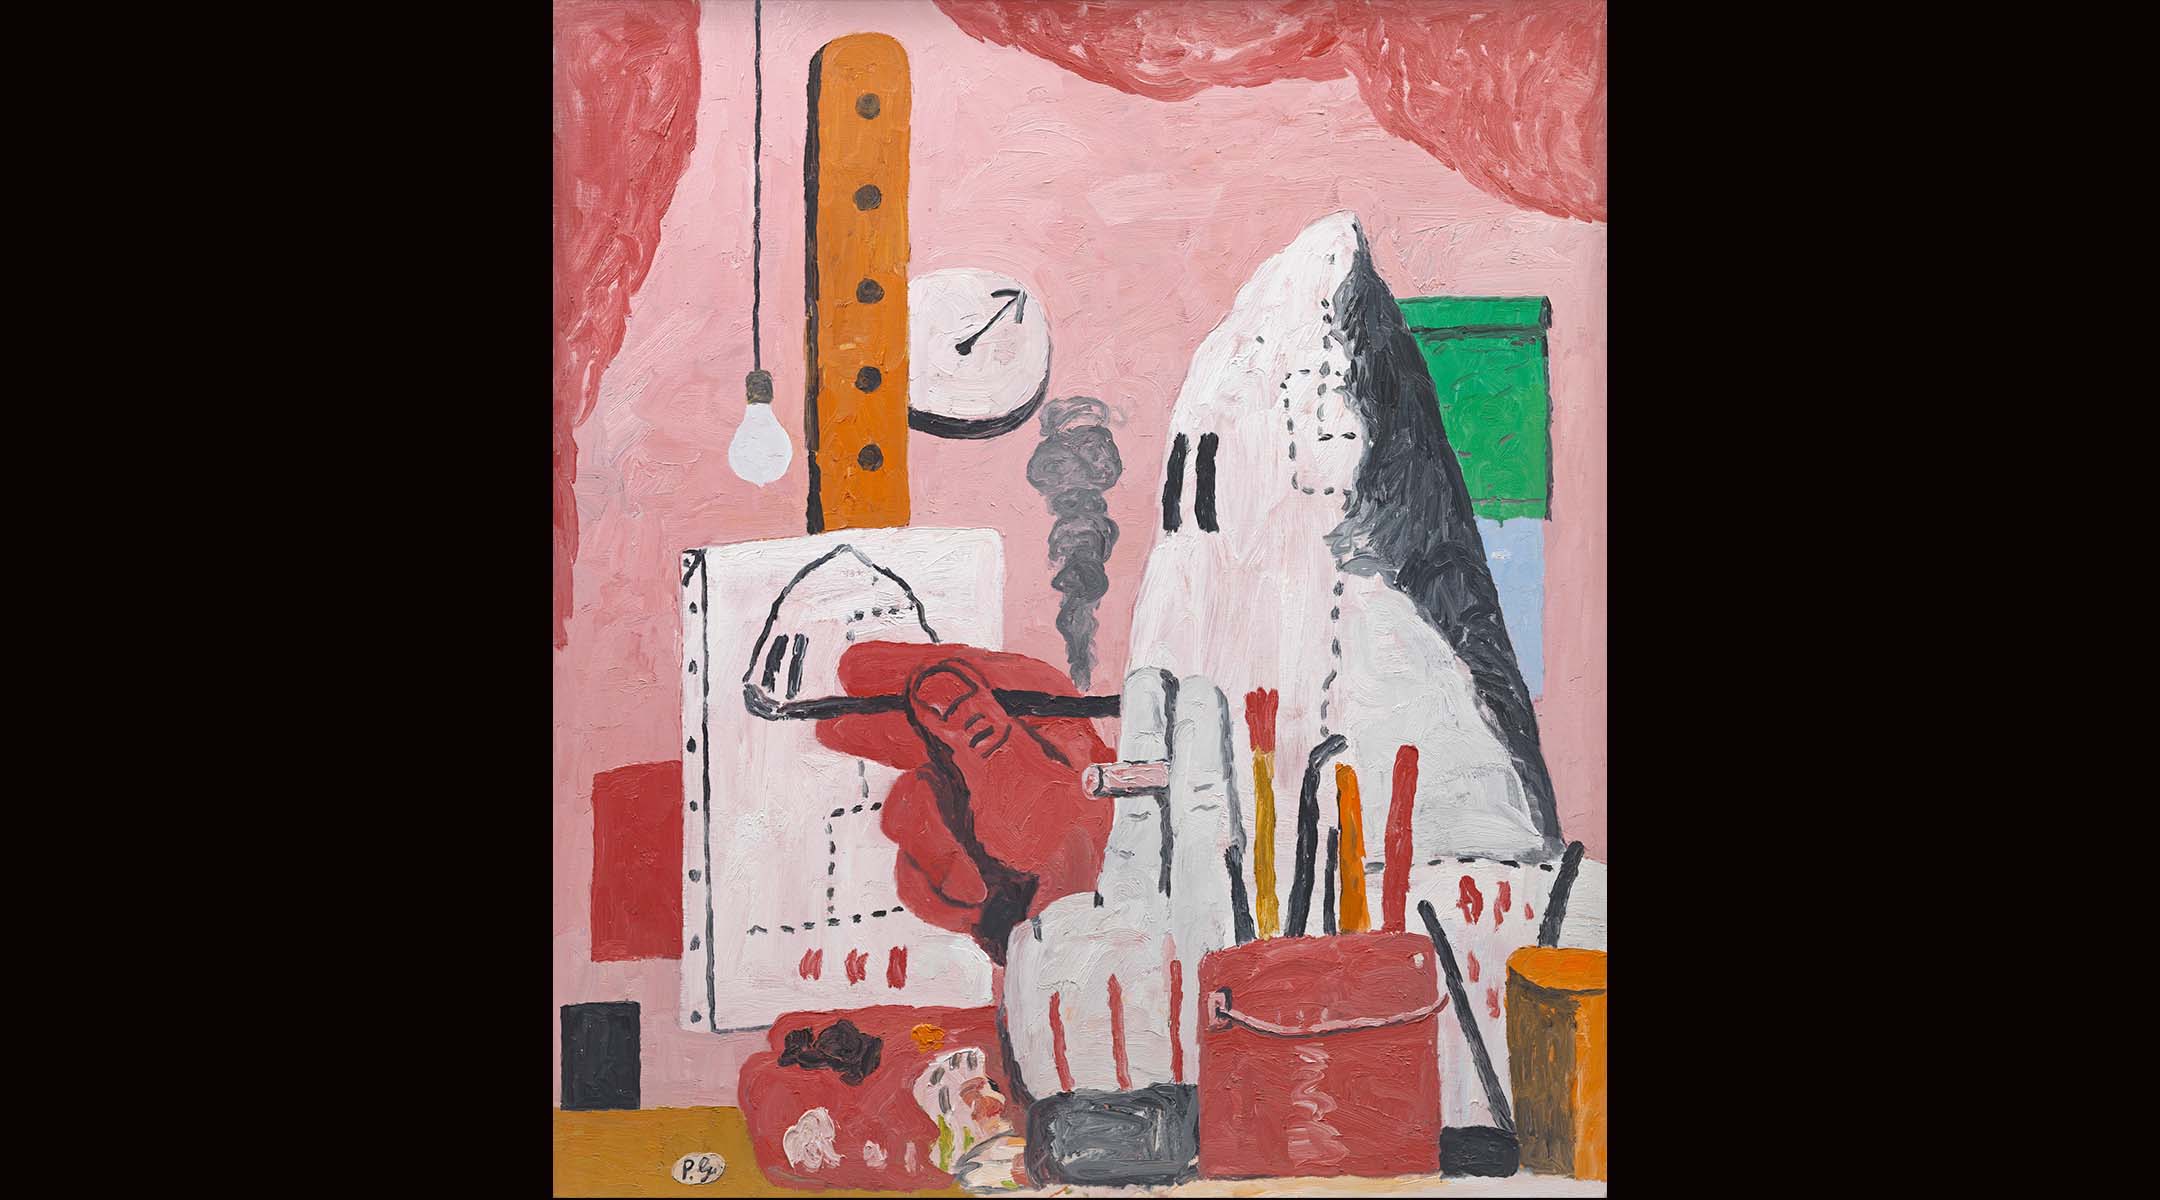 Paintings such as “The Studio” (Oil on canvas, 1969) had museum curators rethink how to present Guston’s work. (Private Collection/© The Estate of Philip Guston, courtesy Hauser & Wirth/Courtesy Museum of Fine Arts, Boston)